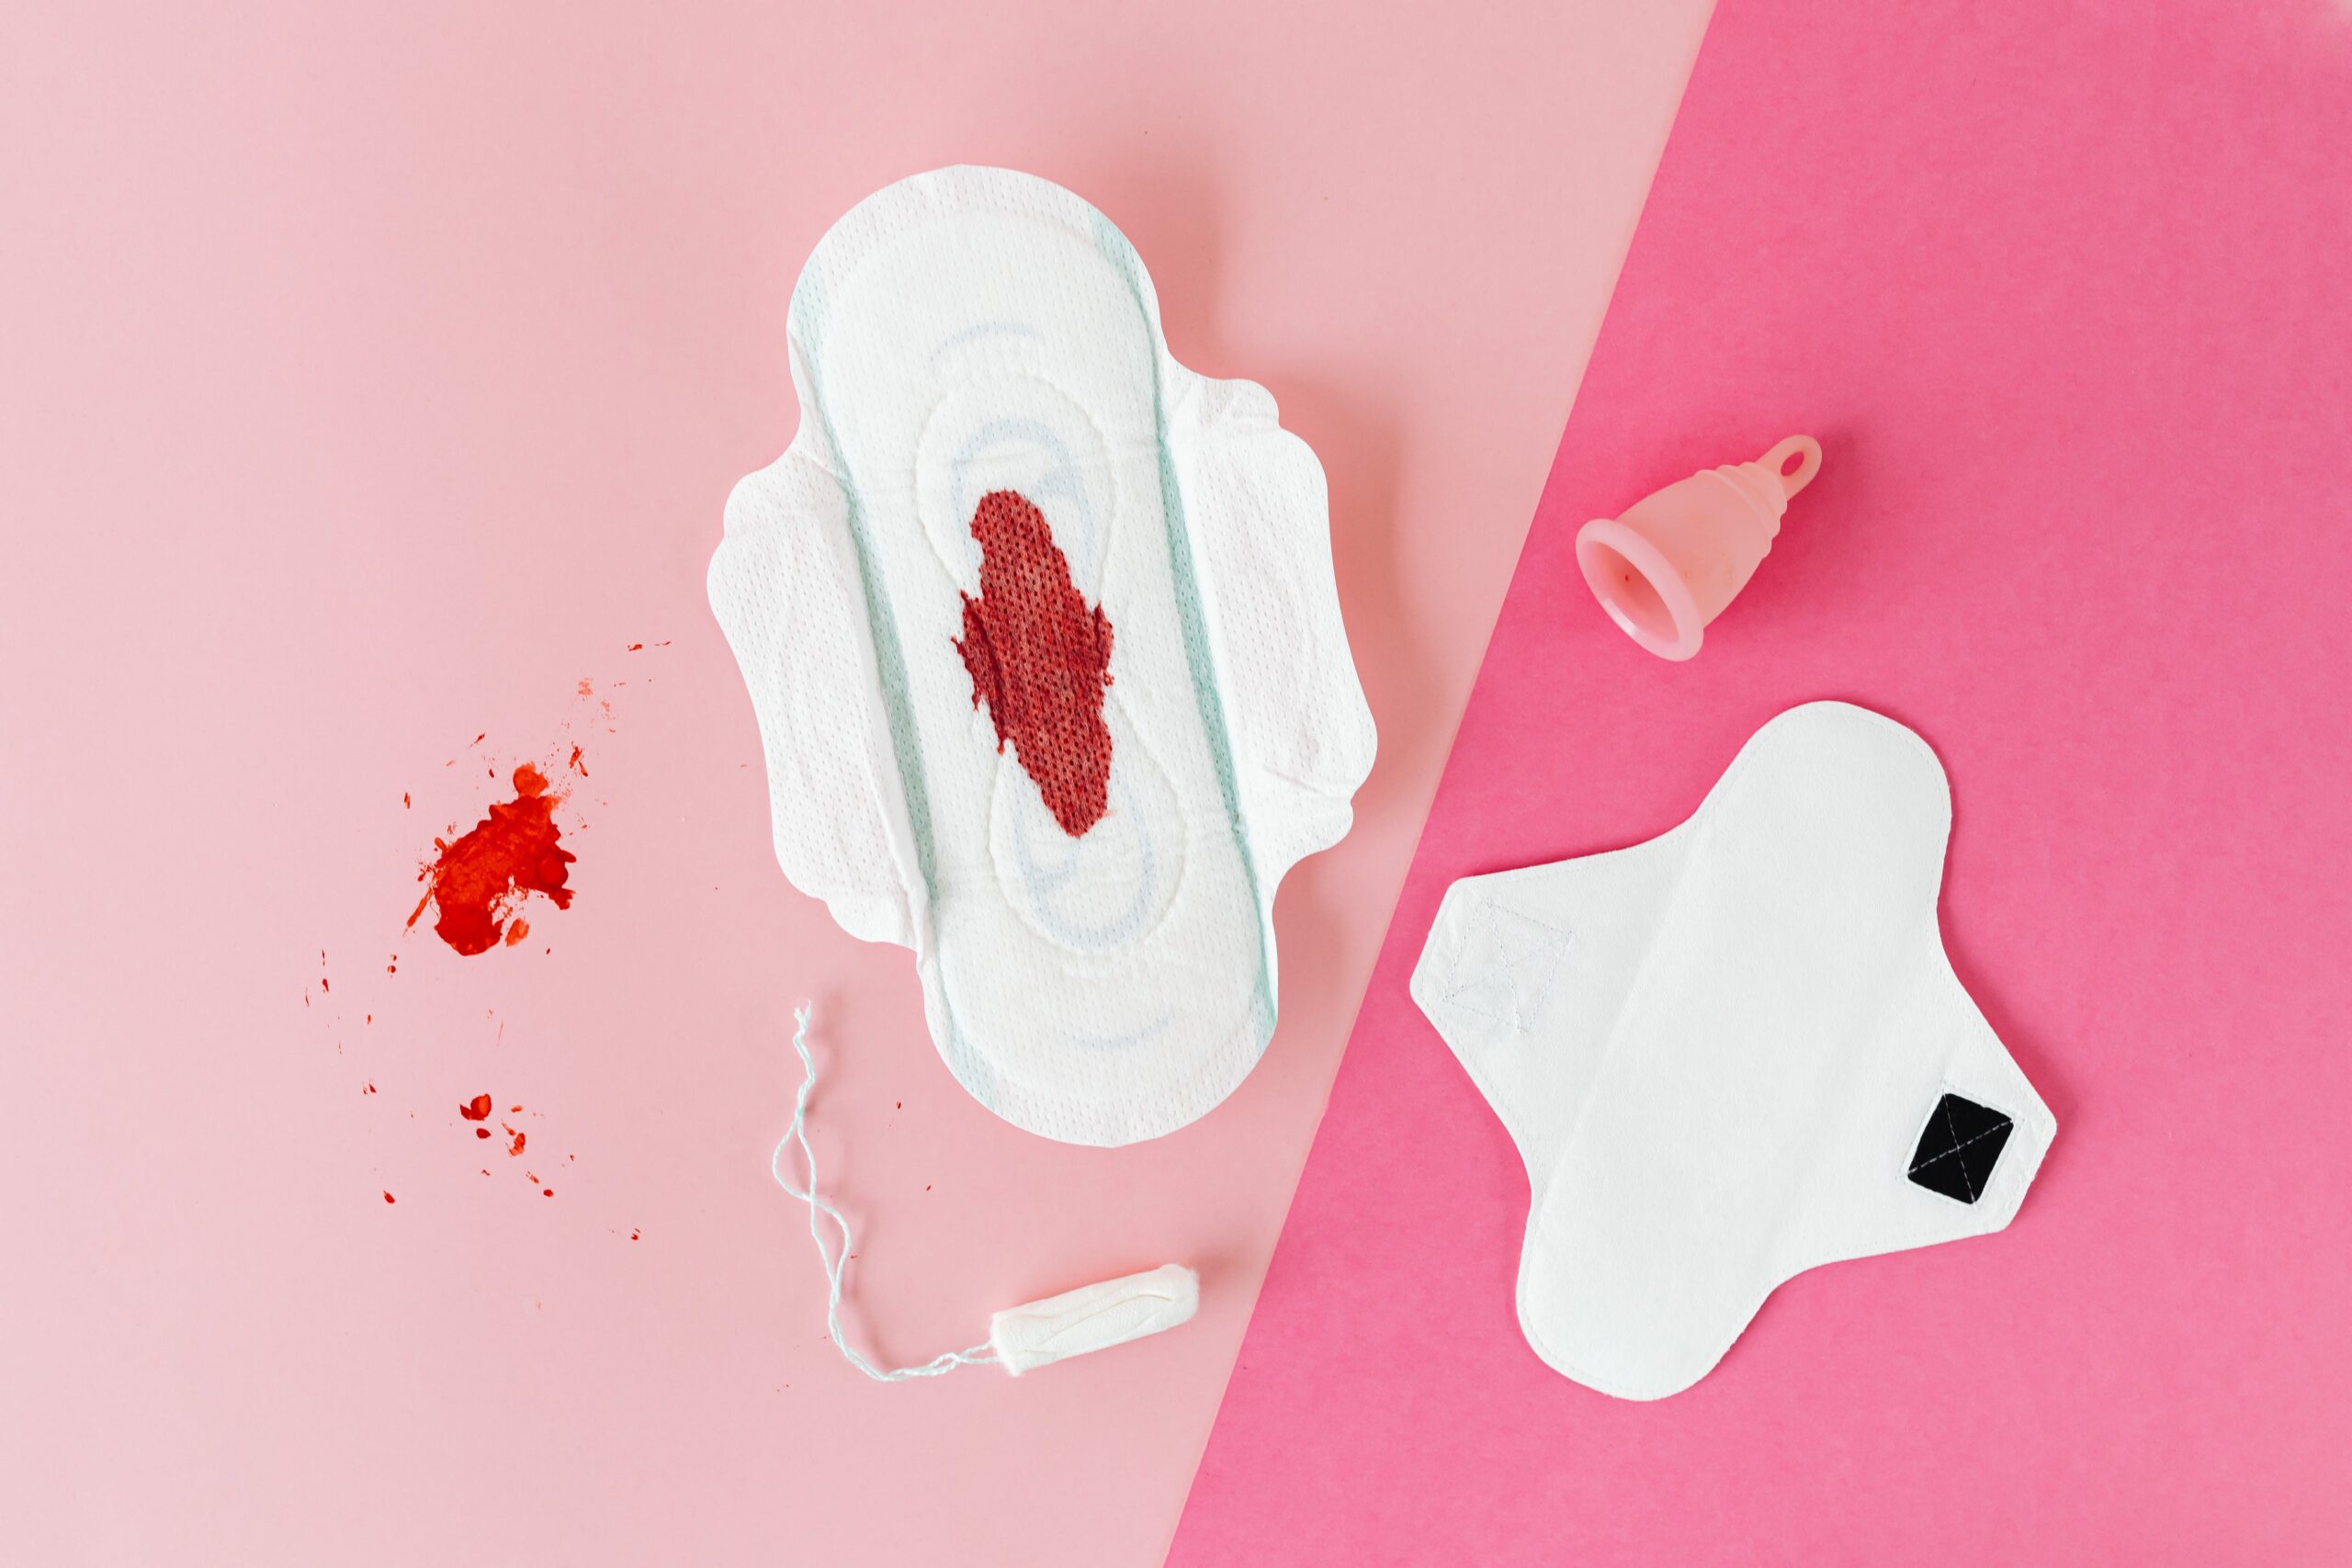 A variety of menstrual products tested with blood